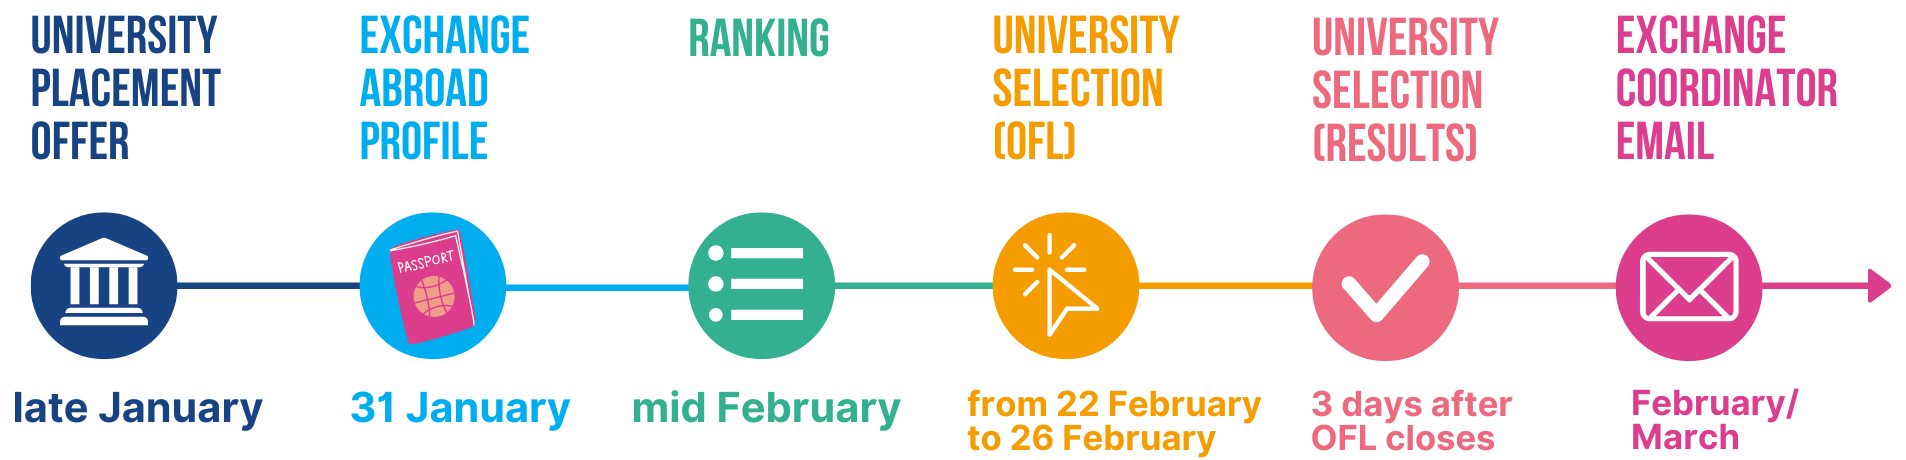 University Selection Timelines (5).png